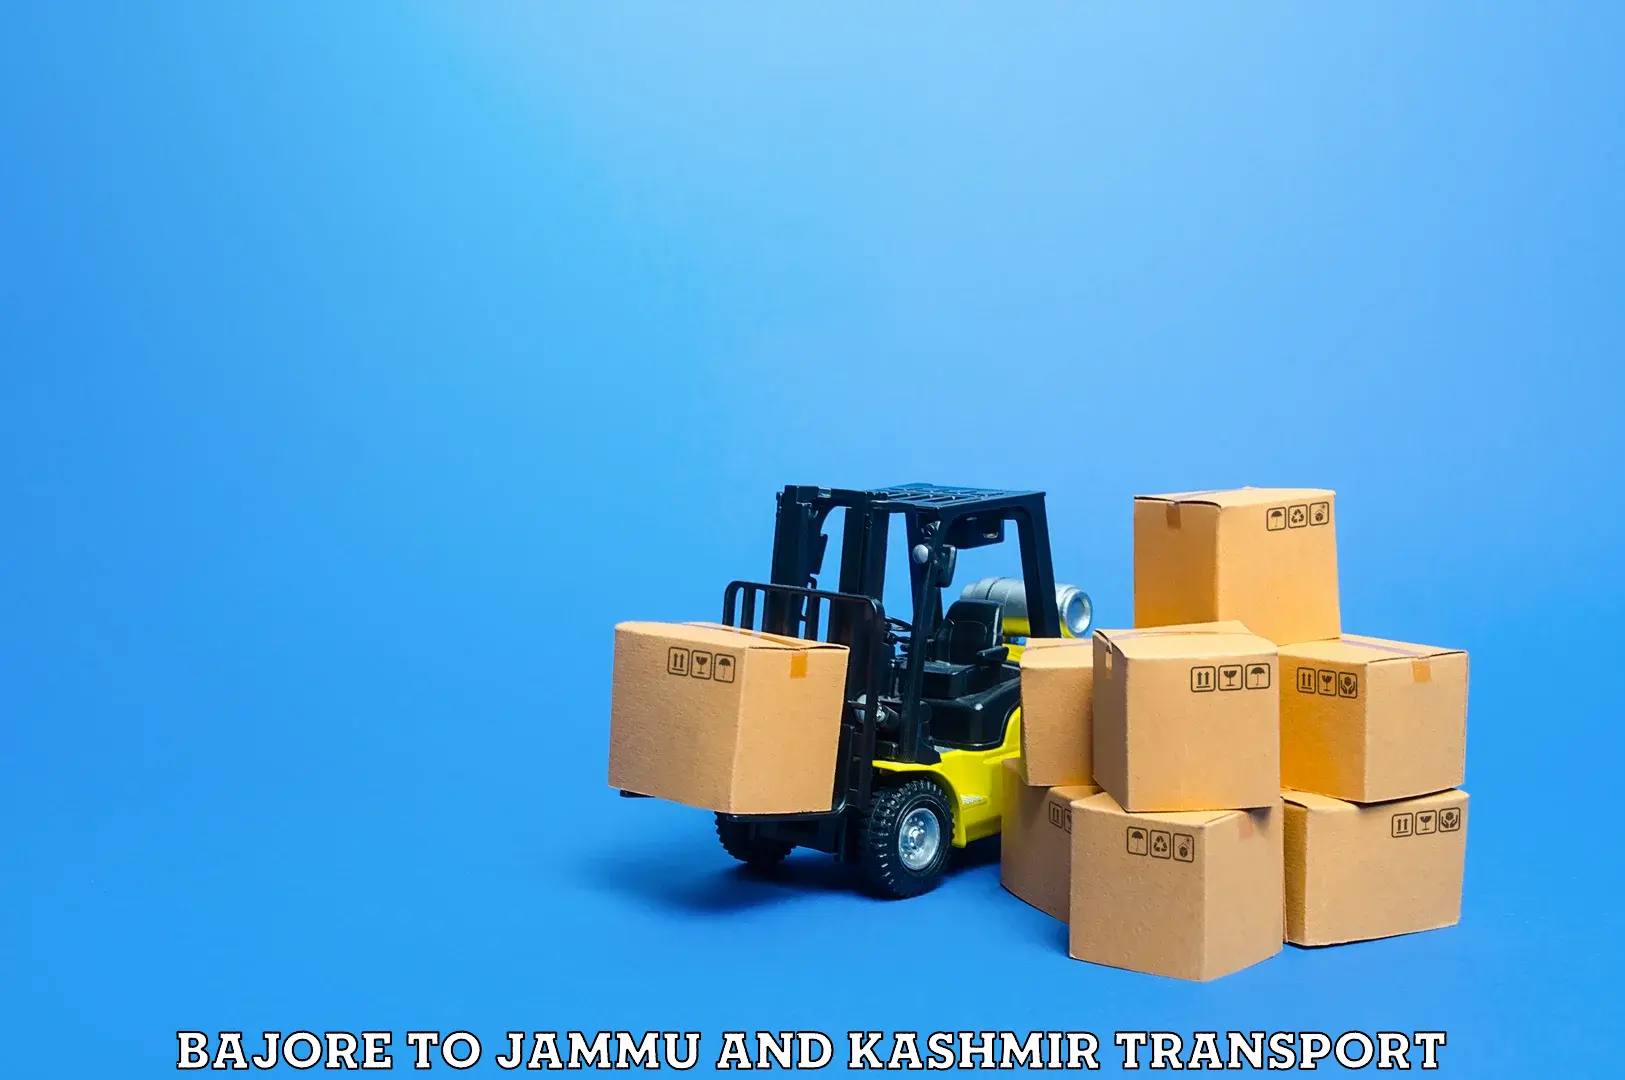 Daily parcel service transport in Bajore to Jammu